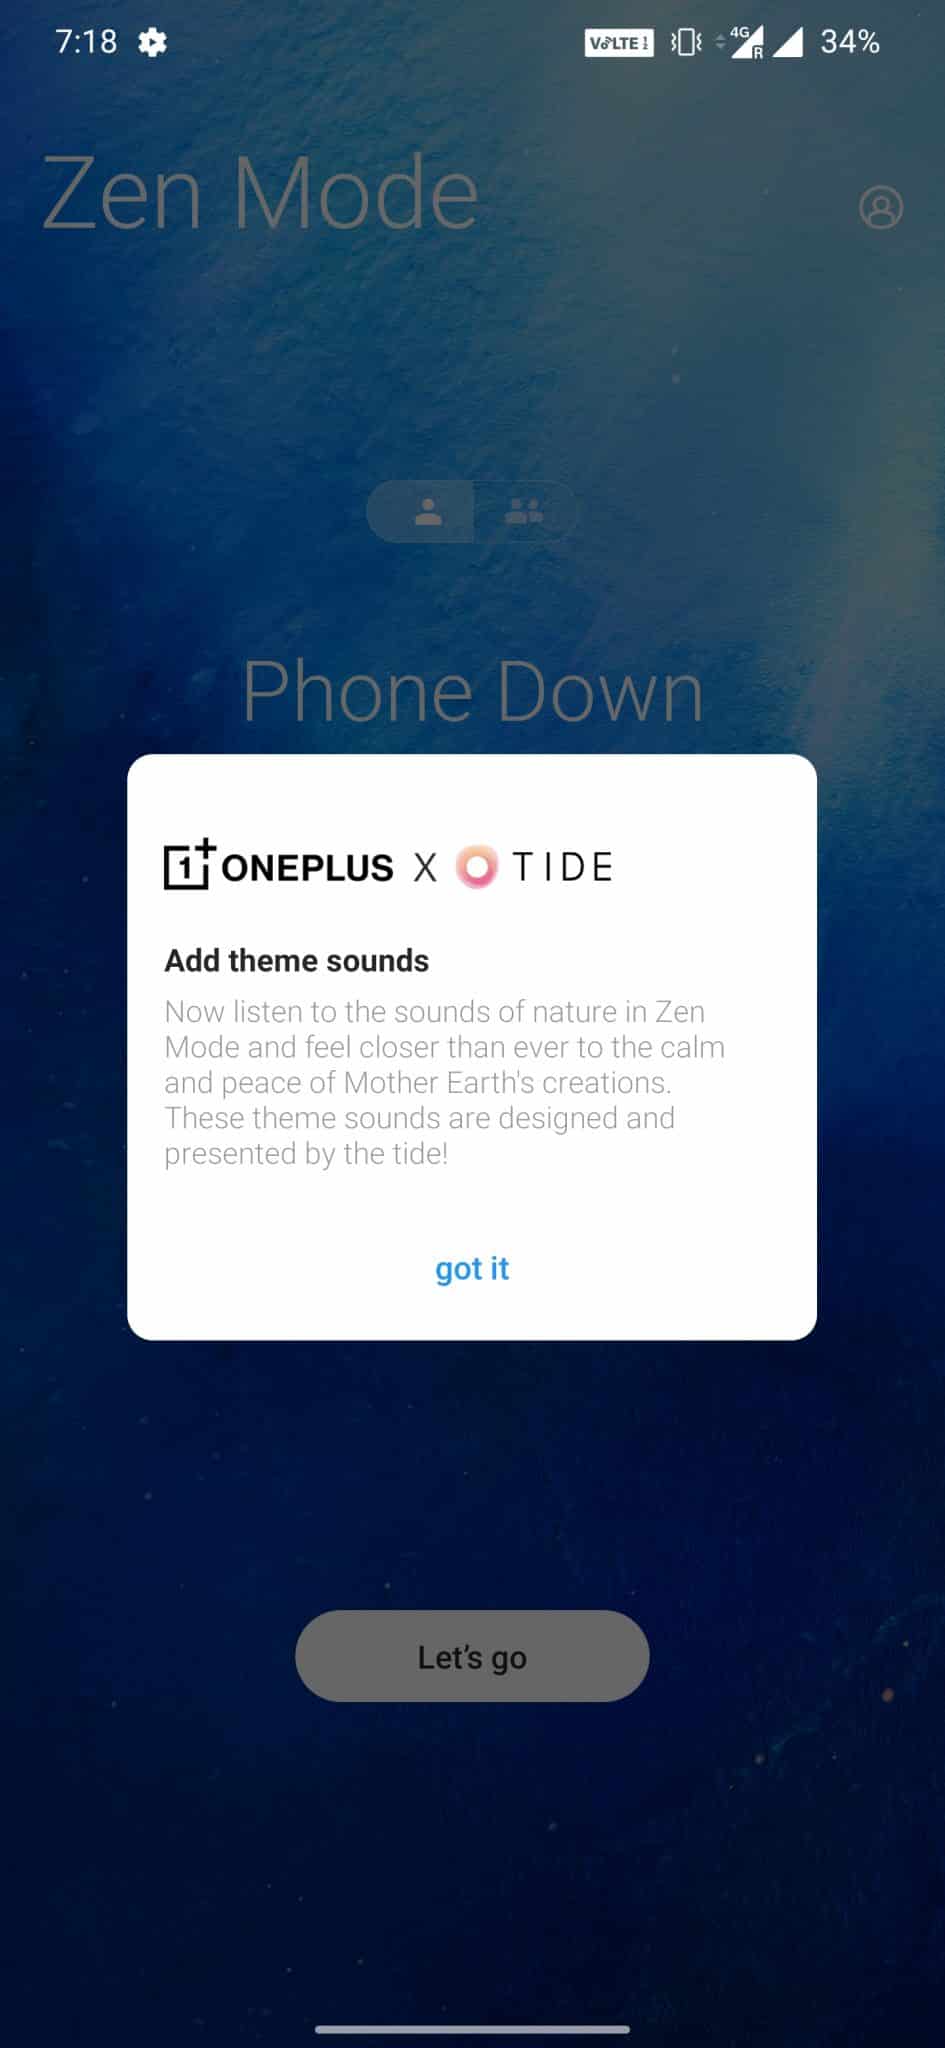 Oneplus updates Zen Mode in collaboration with Tide app adding them sound